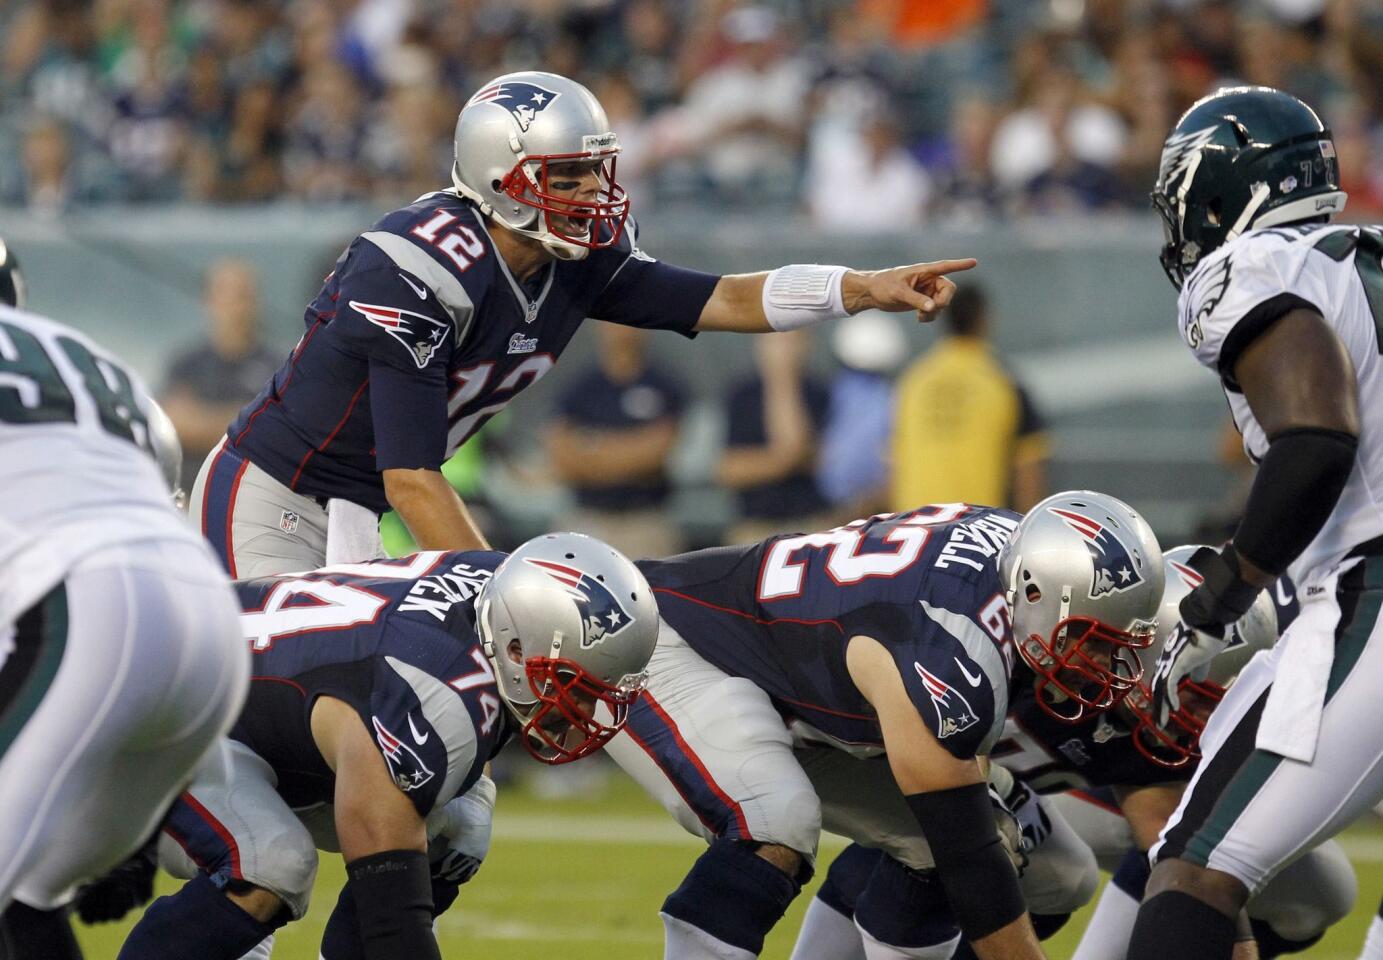 New England Patriots quarterback Tom Brady (12) sets the offense while playing against the Philadelphia Eagles during the first quarter of their NFL pre-season football game in Philadelphia, Pennsylvania, August 9, 2013.